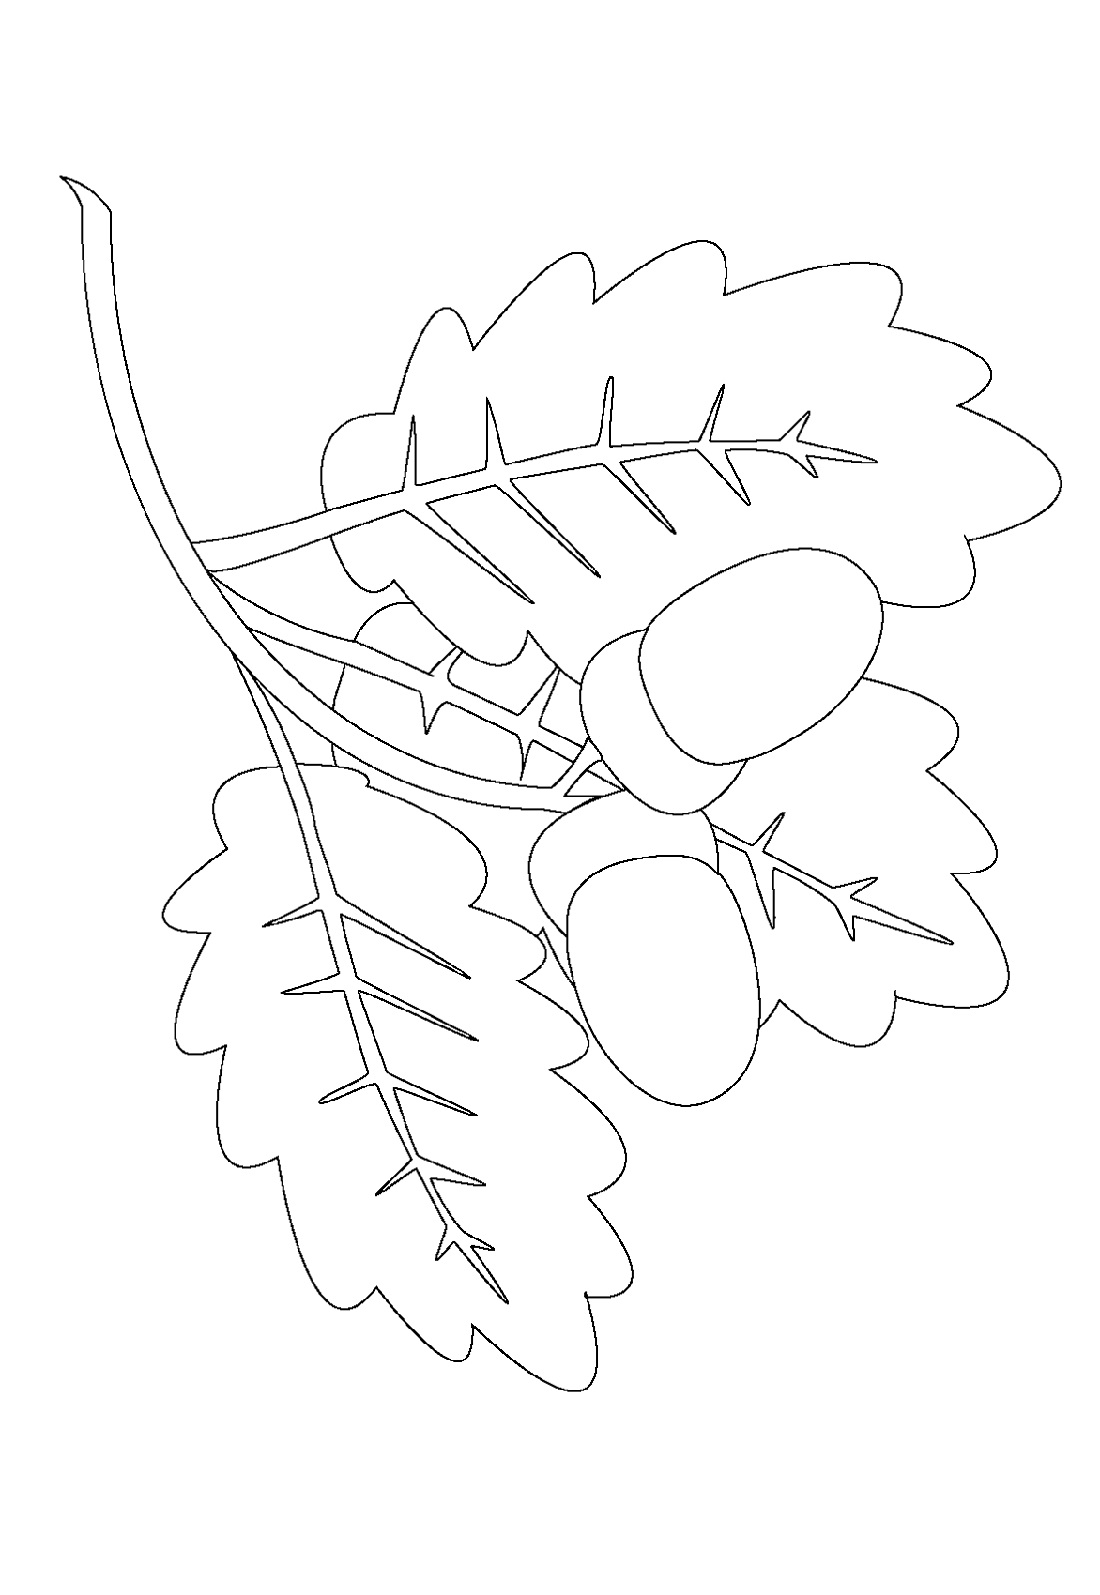 Leaf Coloring Page for Kids